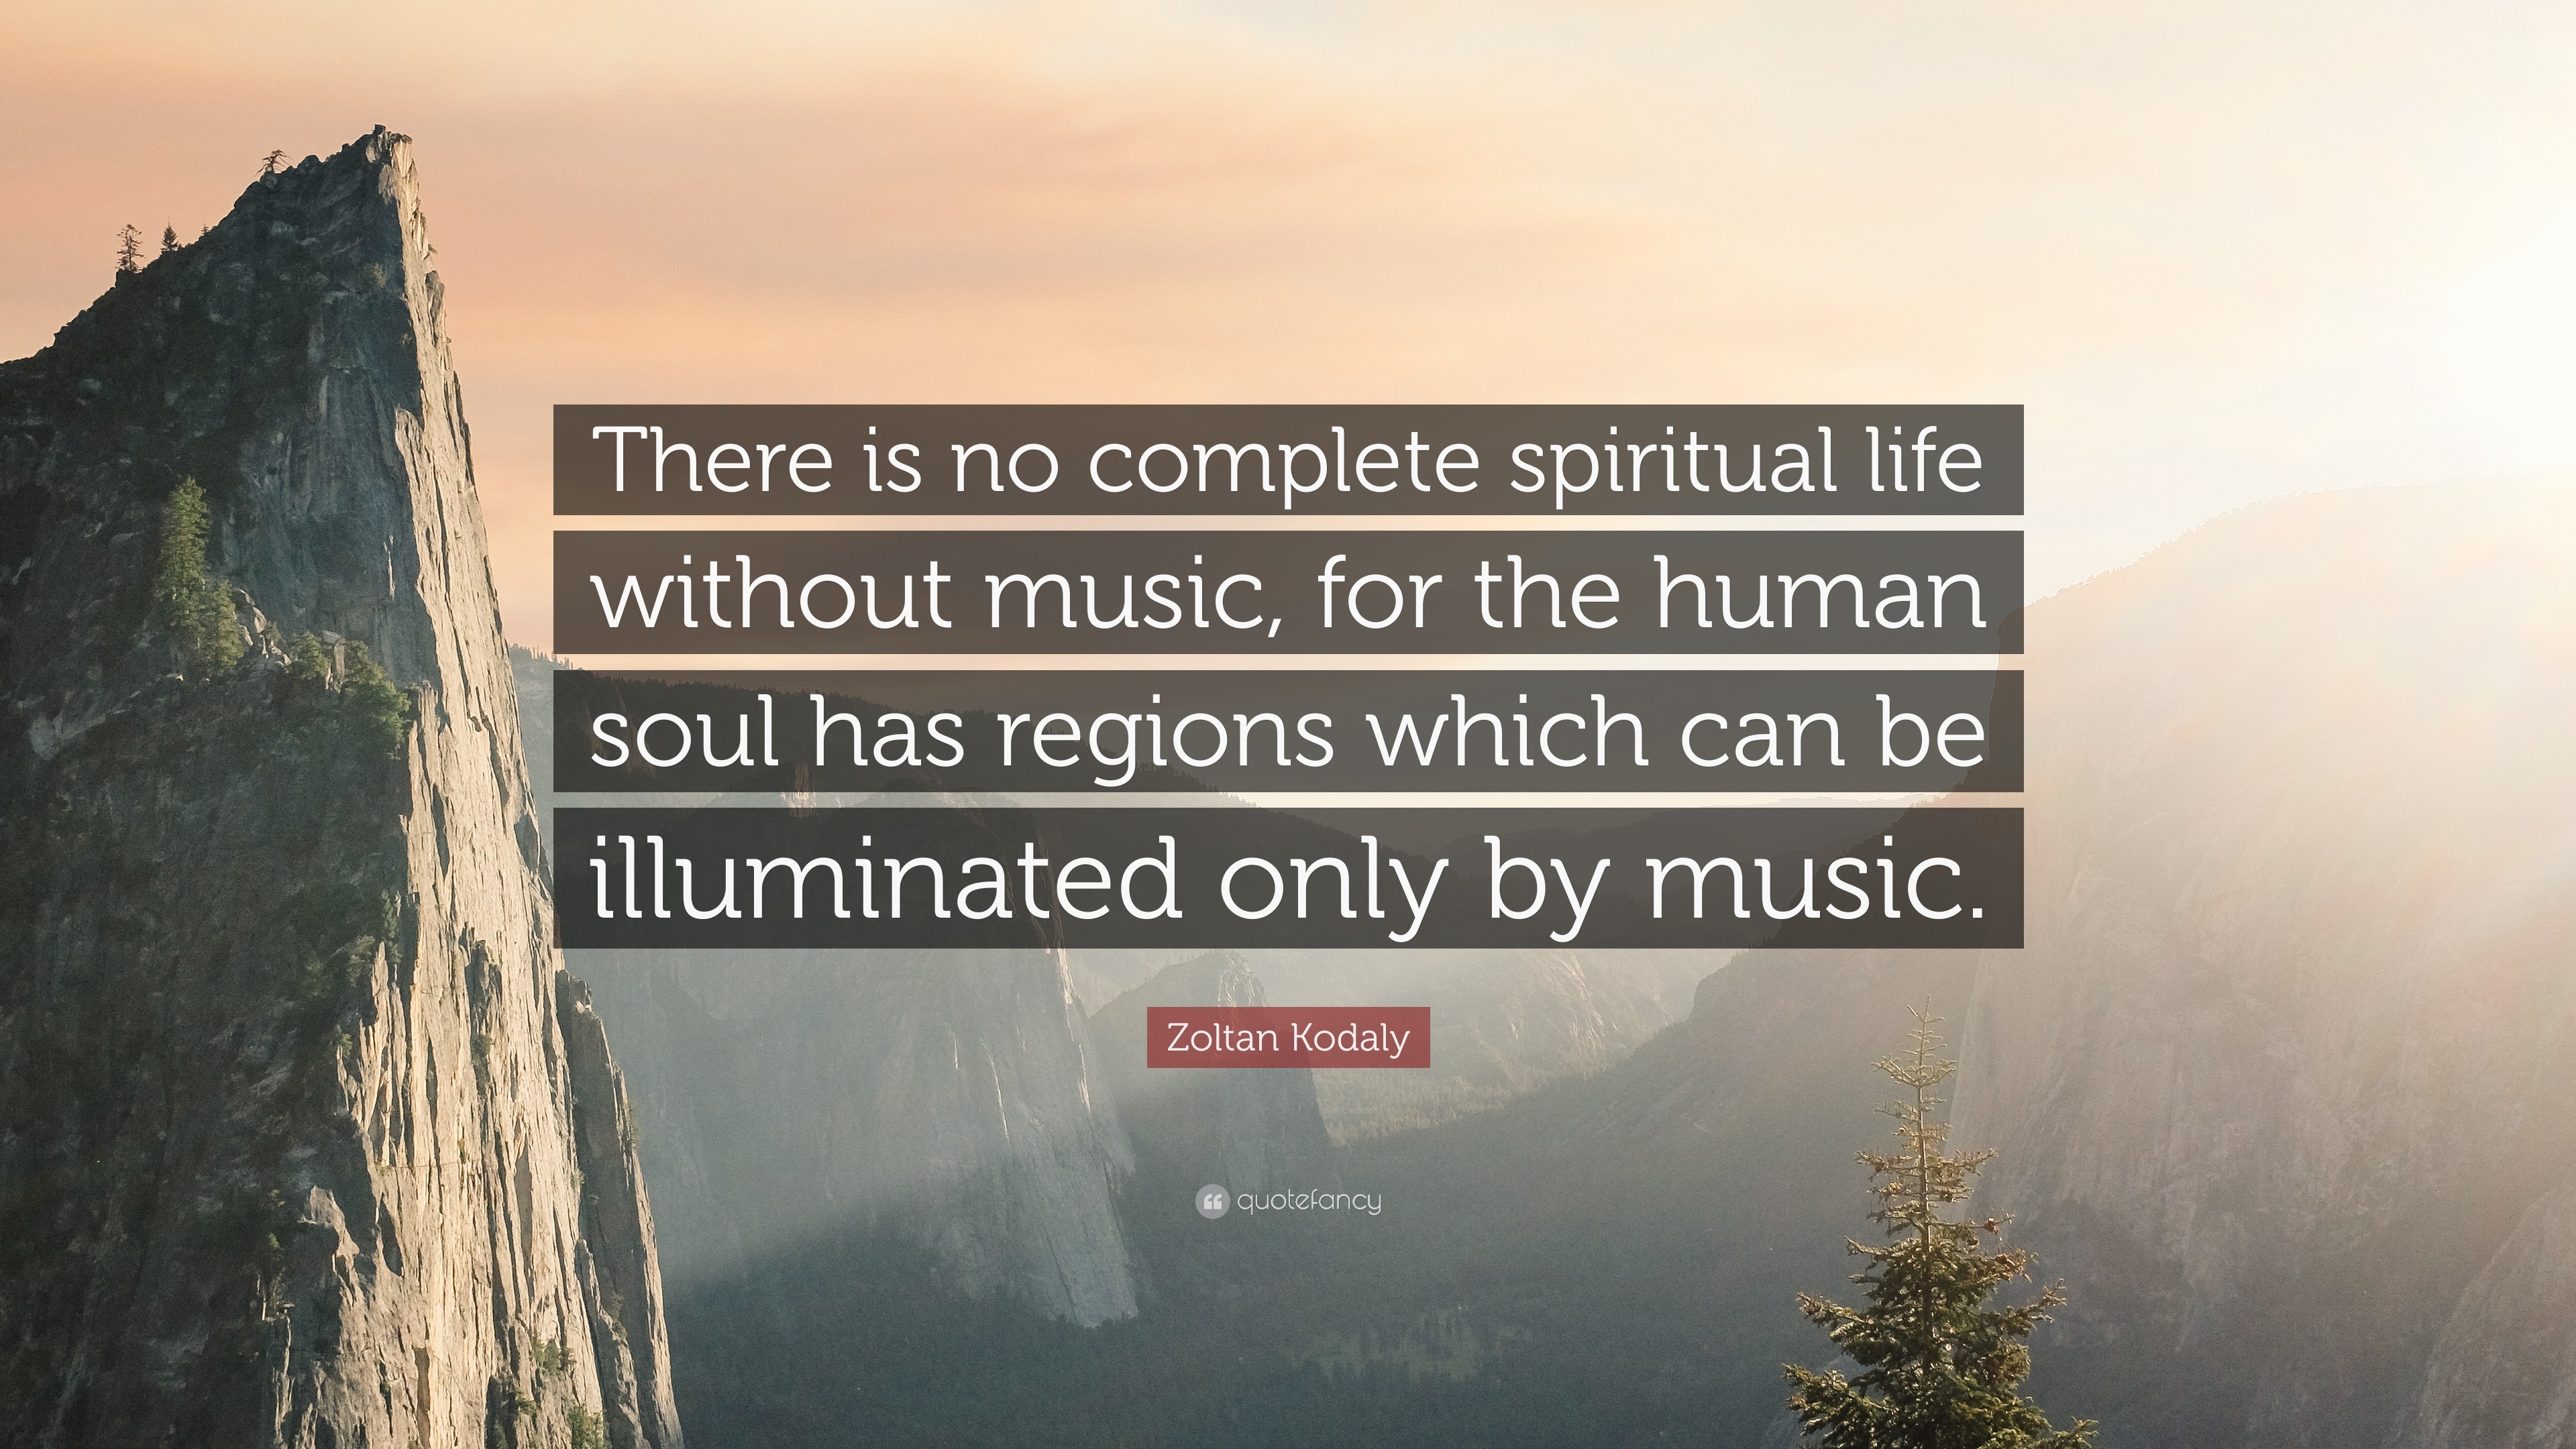 Zoltan Kodaly Quote “There is no plete spiritual life without music for the